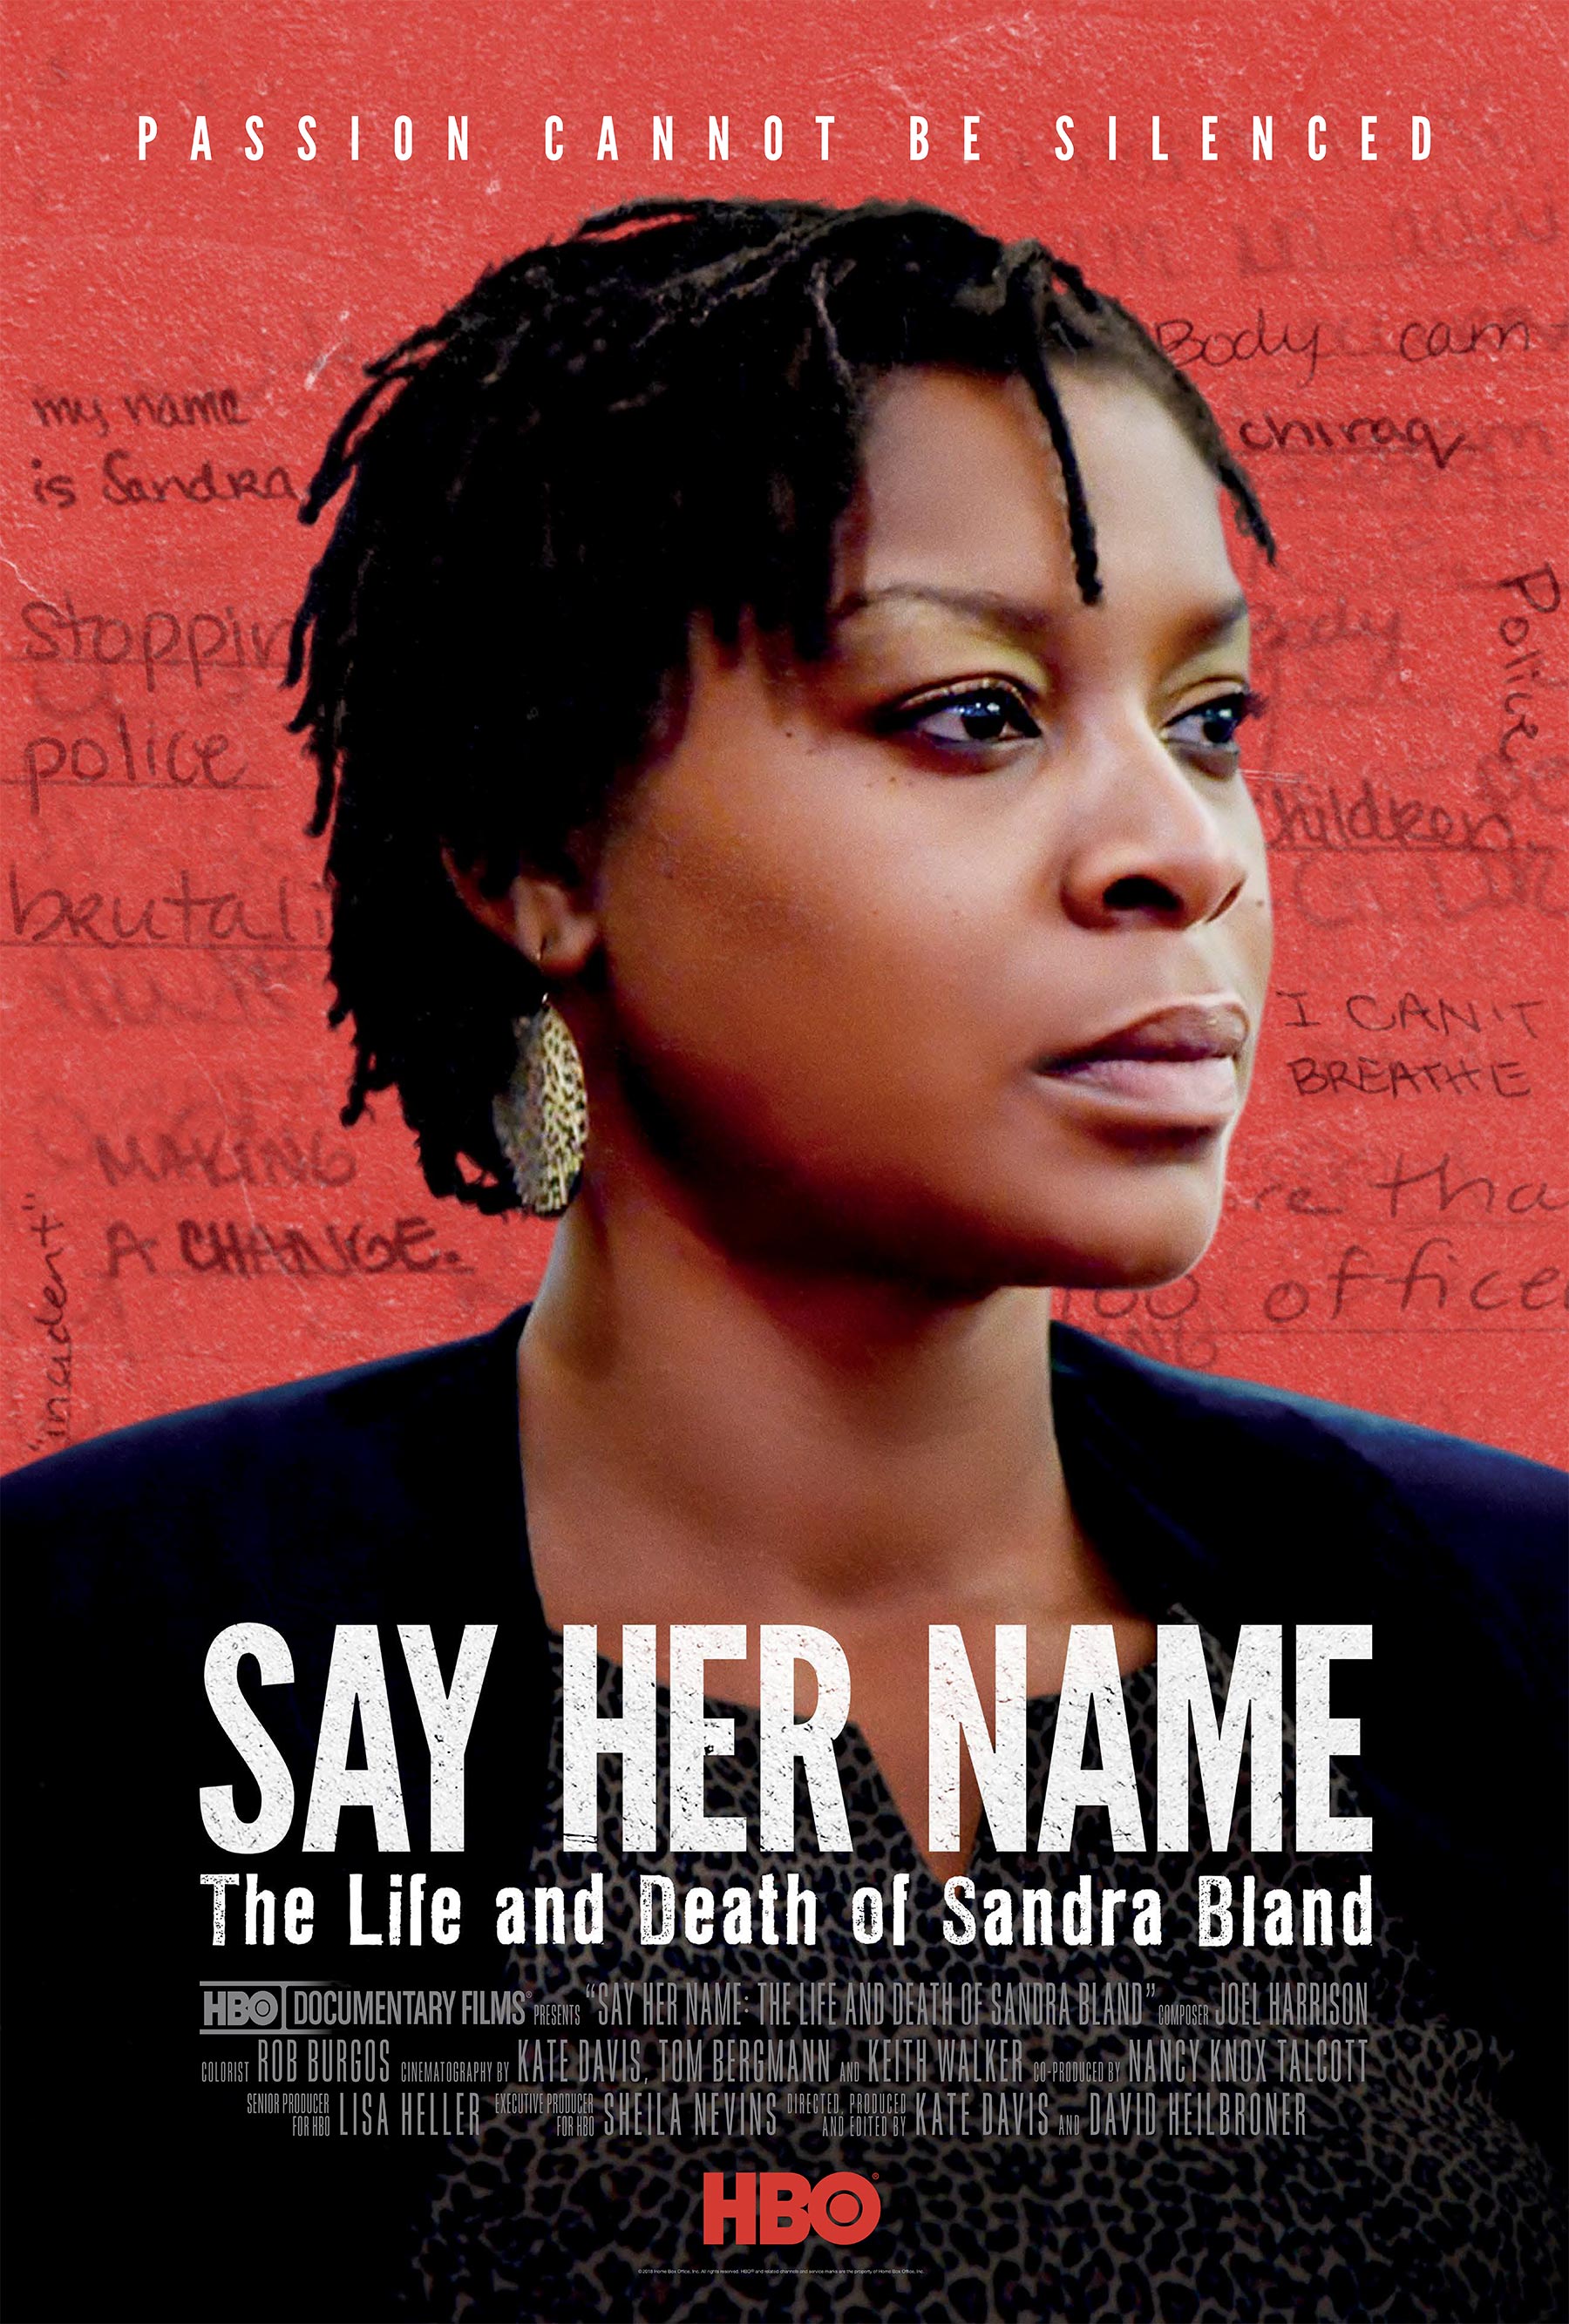 An investigation into what happened to political activist Sandra Bland, who died while in police custody.